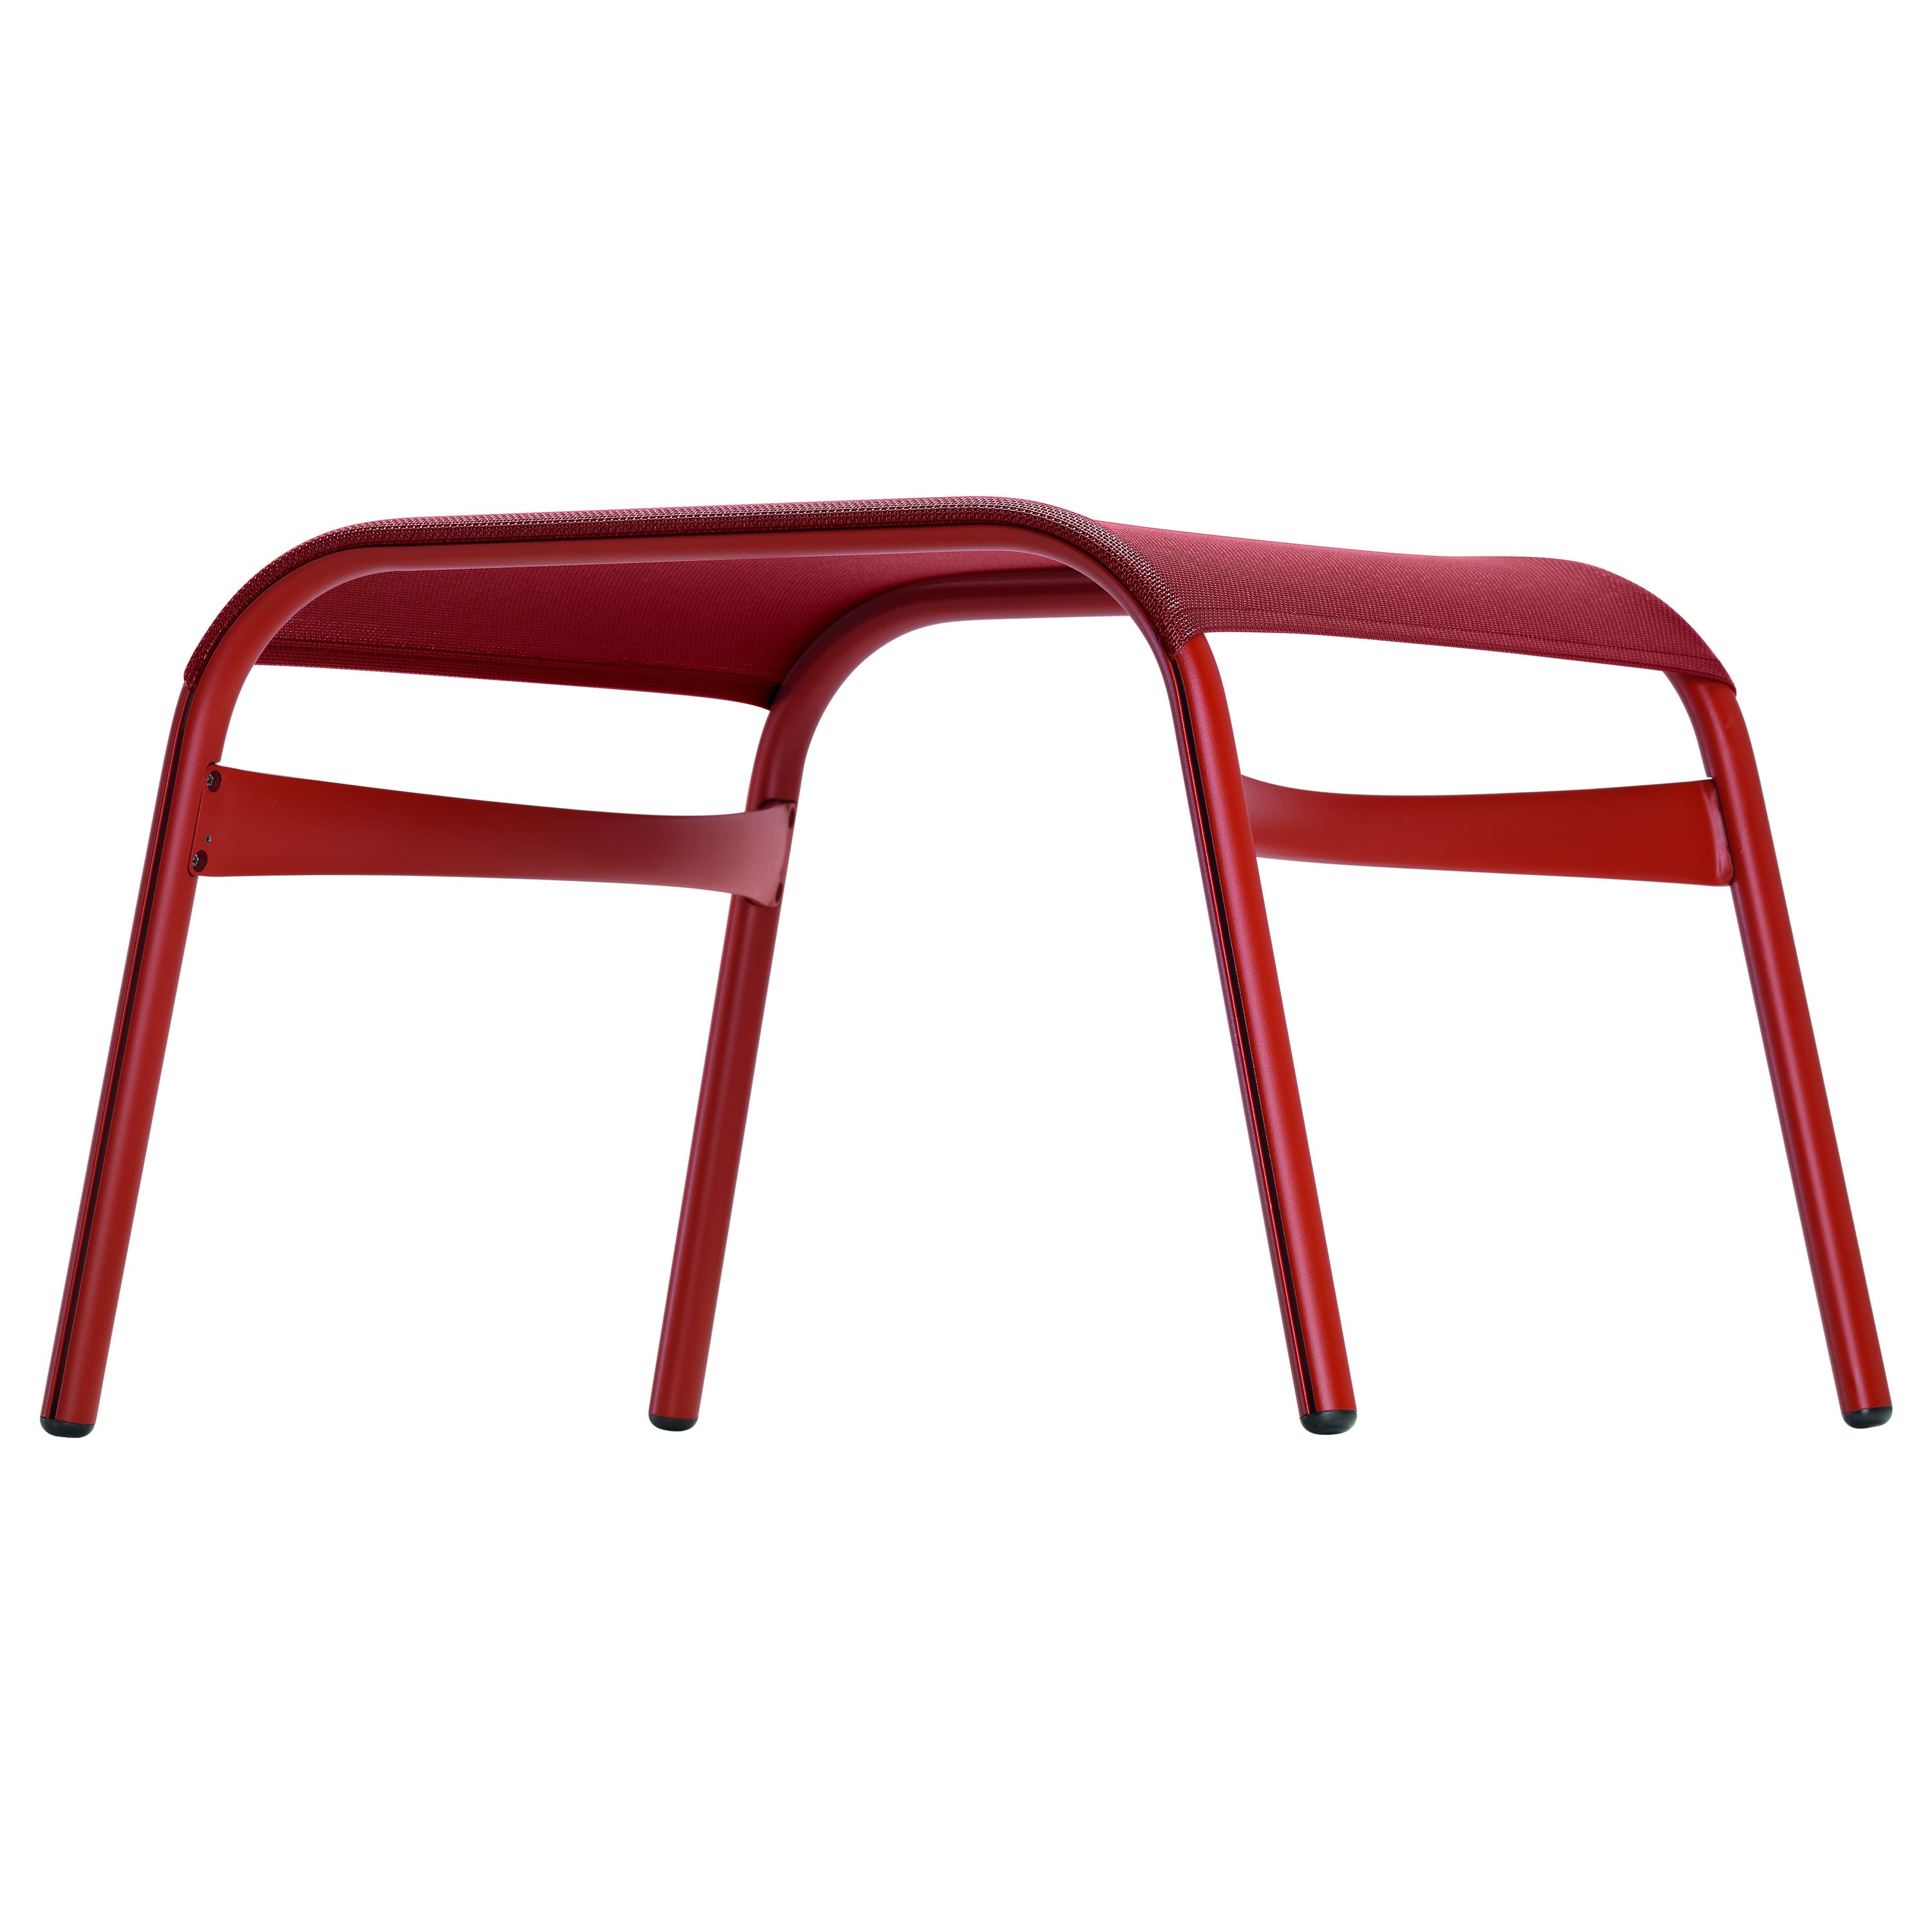 Alias Feetframe 431 Outdoor Stool in Coral Red Mesh & Lacquered Aluminium Frame For Sale